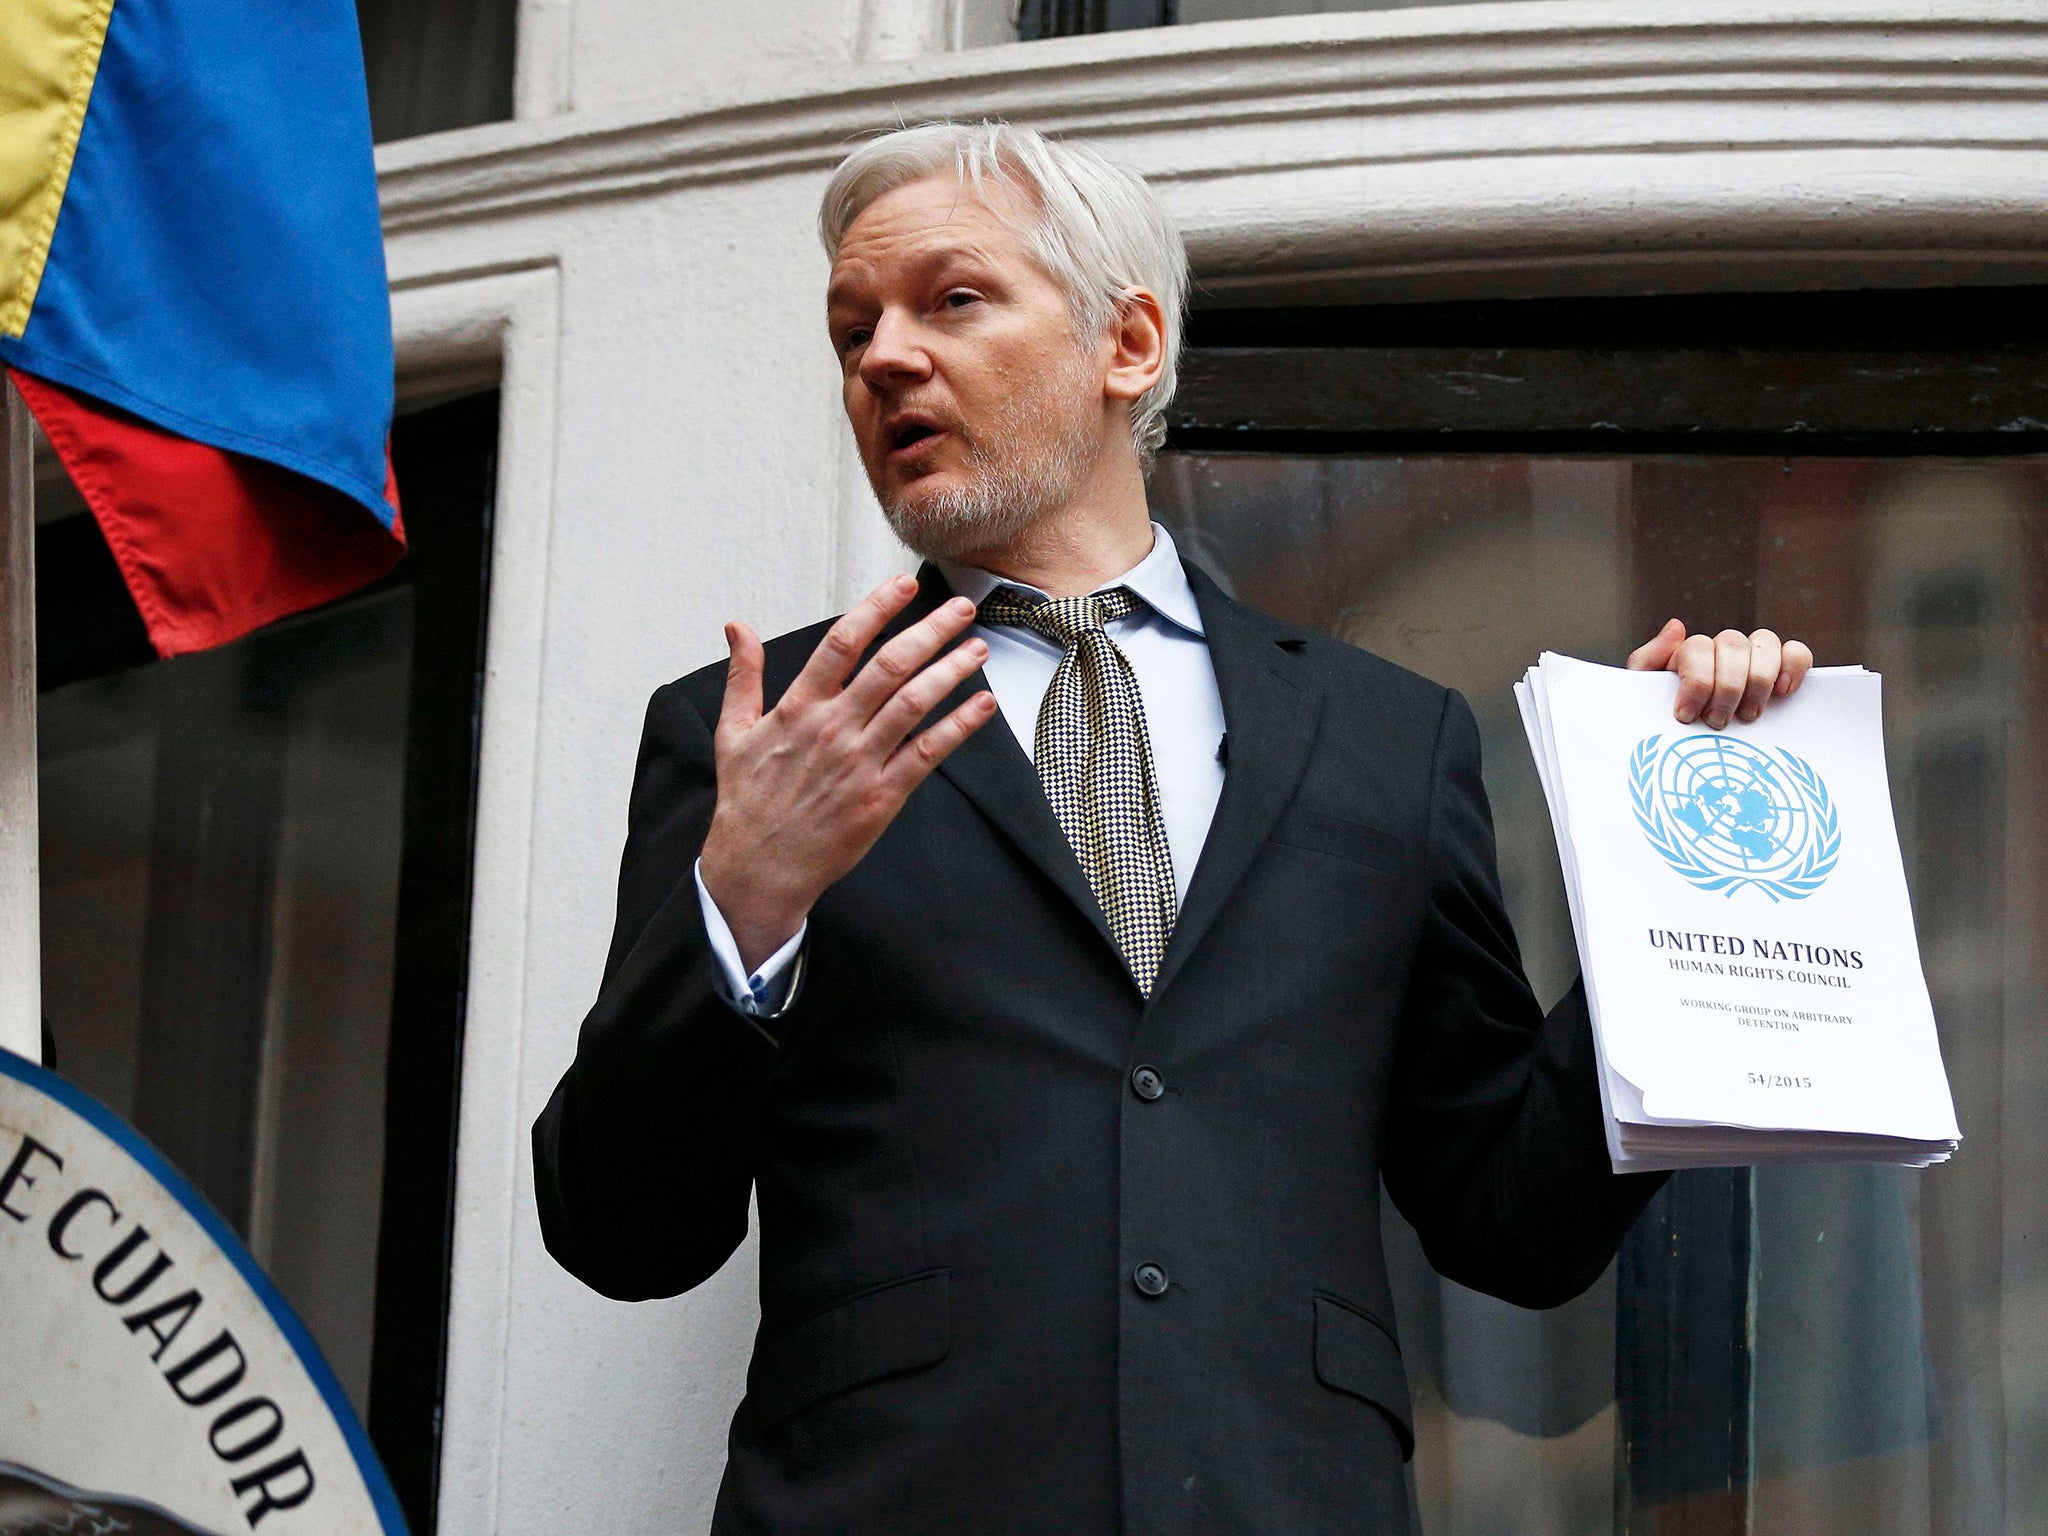 WikiLeaks founder Julian Assange holds a copy of a U.N. ruling as he makes a speech from the balcony of the Ecuadorian Embassy, in central London